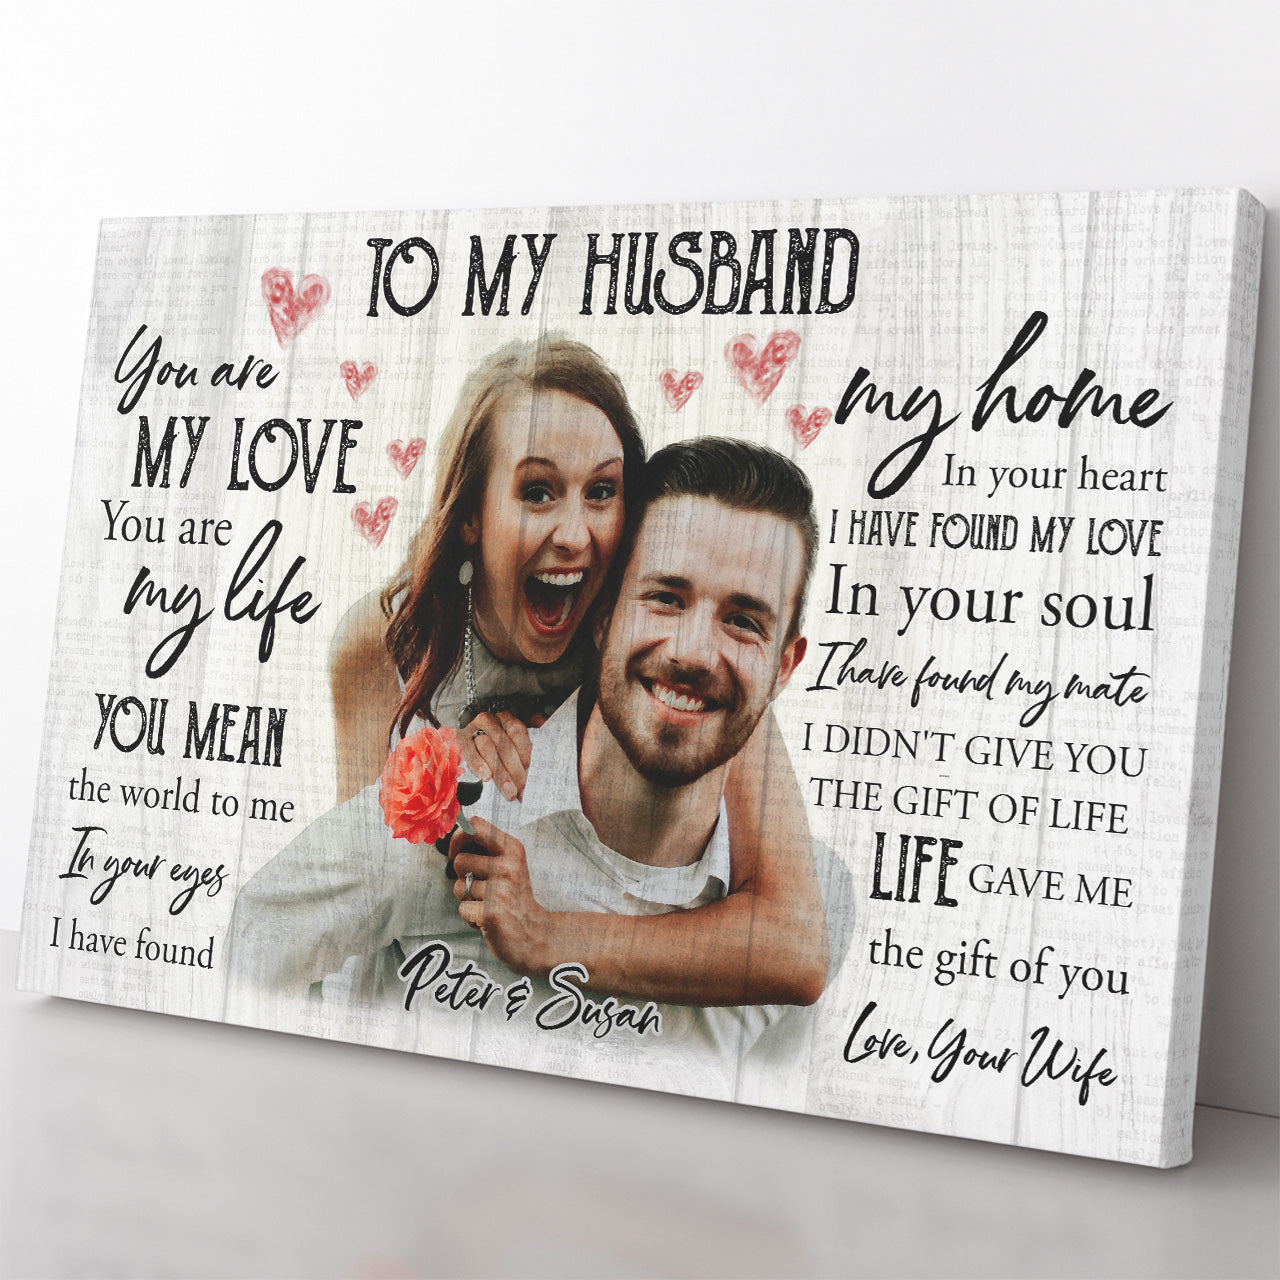 12 Unusual Gifts That Will Actually Surprise Your Husband on His Birthday |  ArtPix 3D